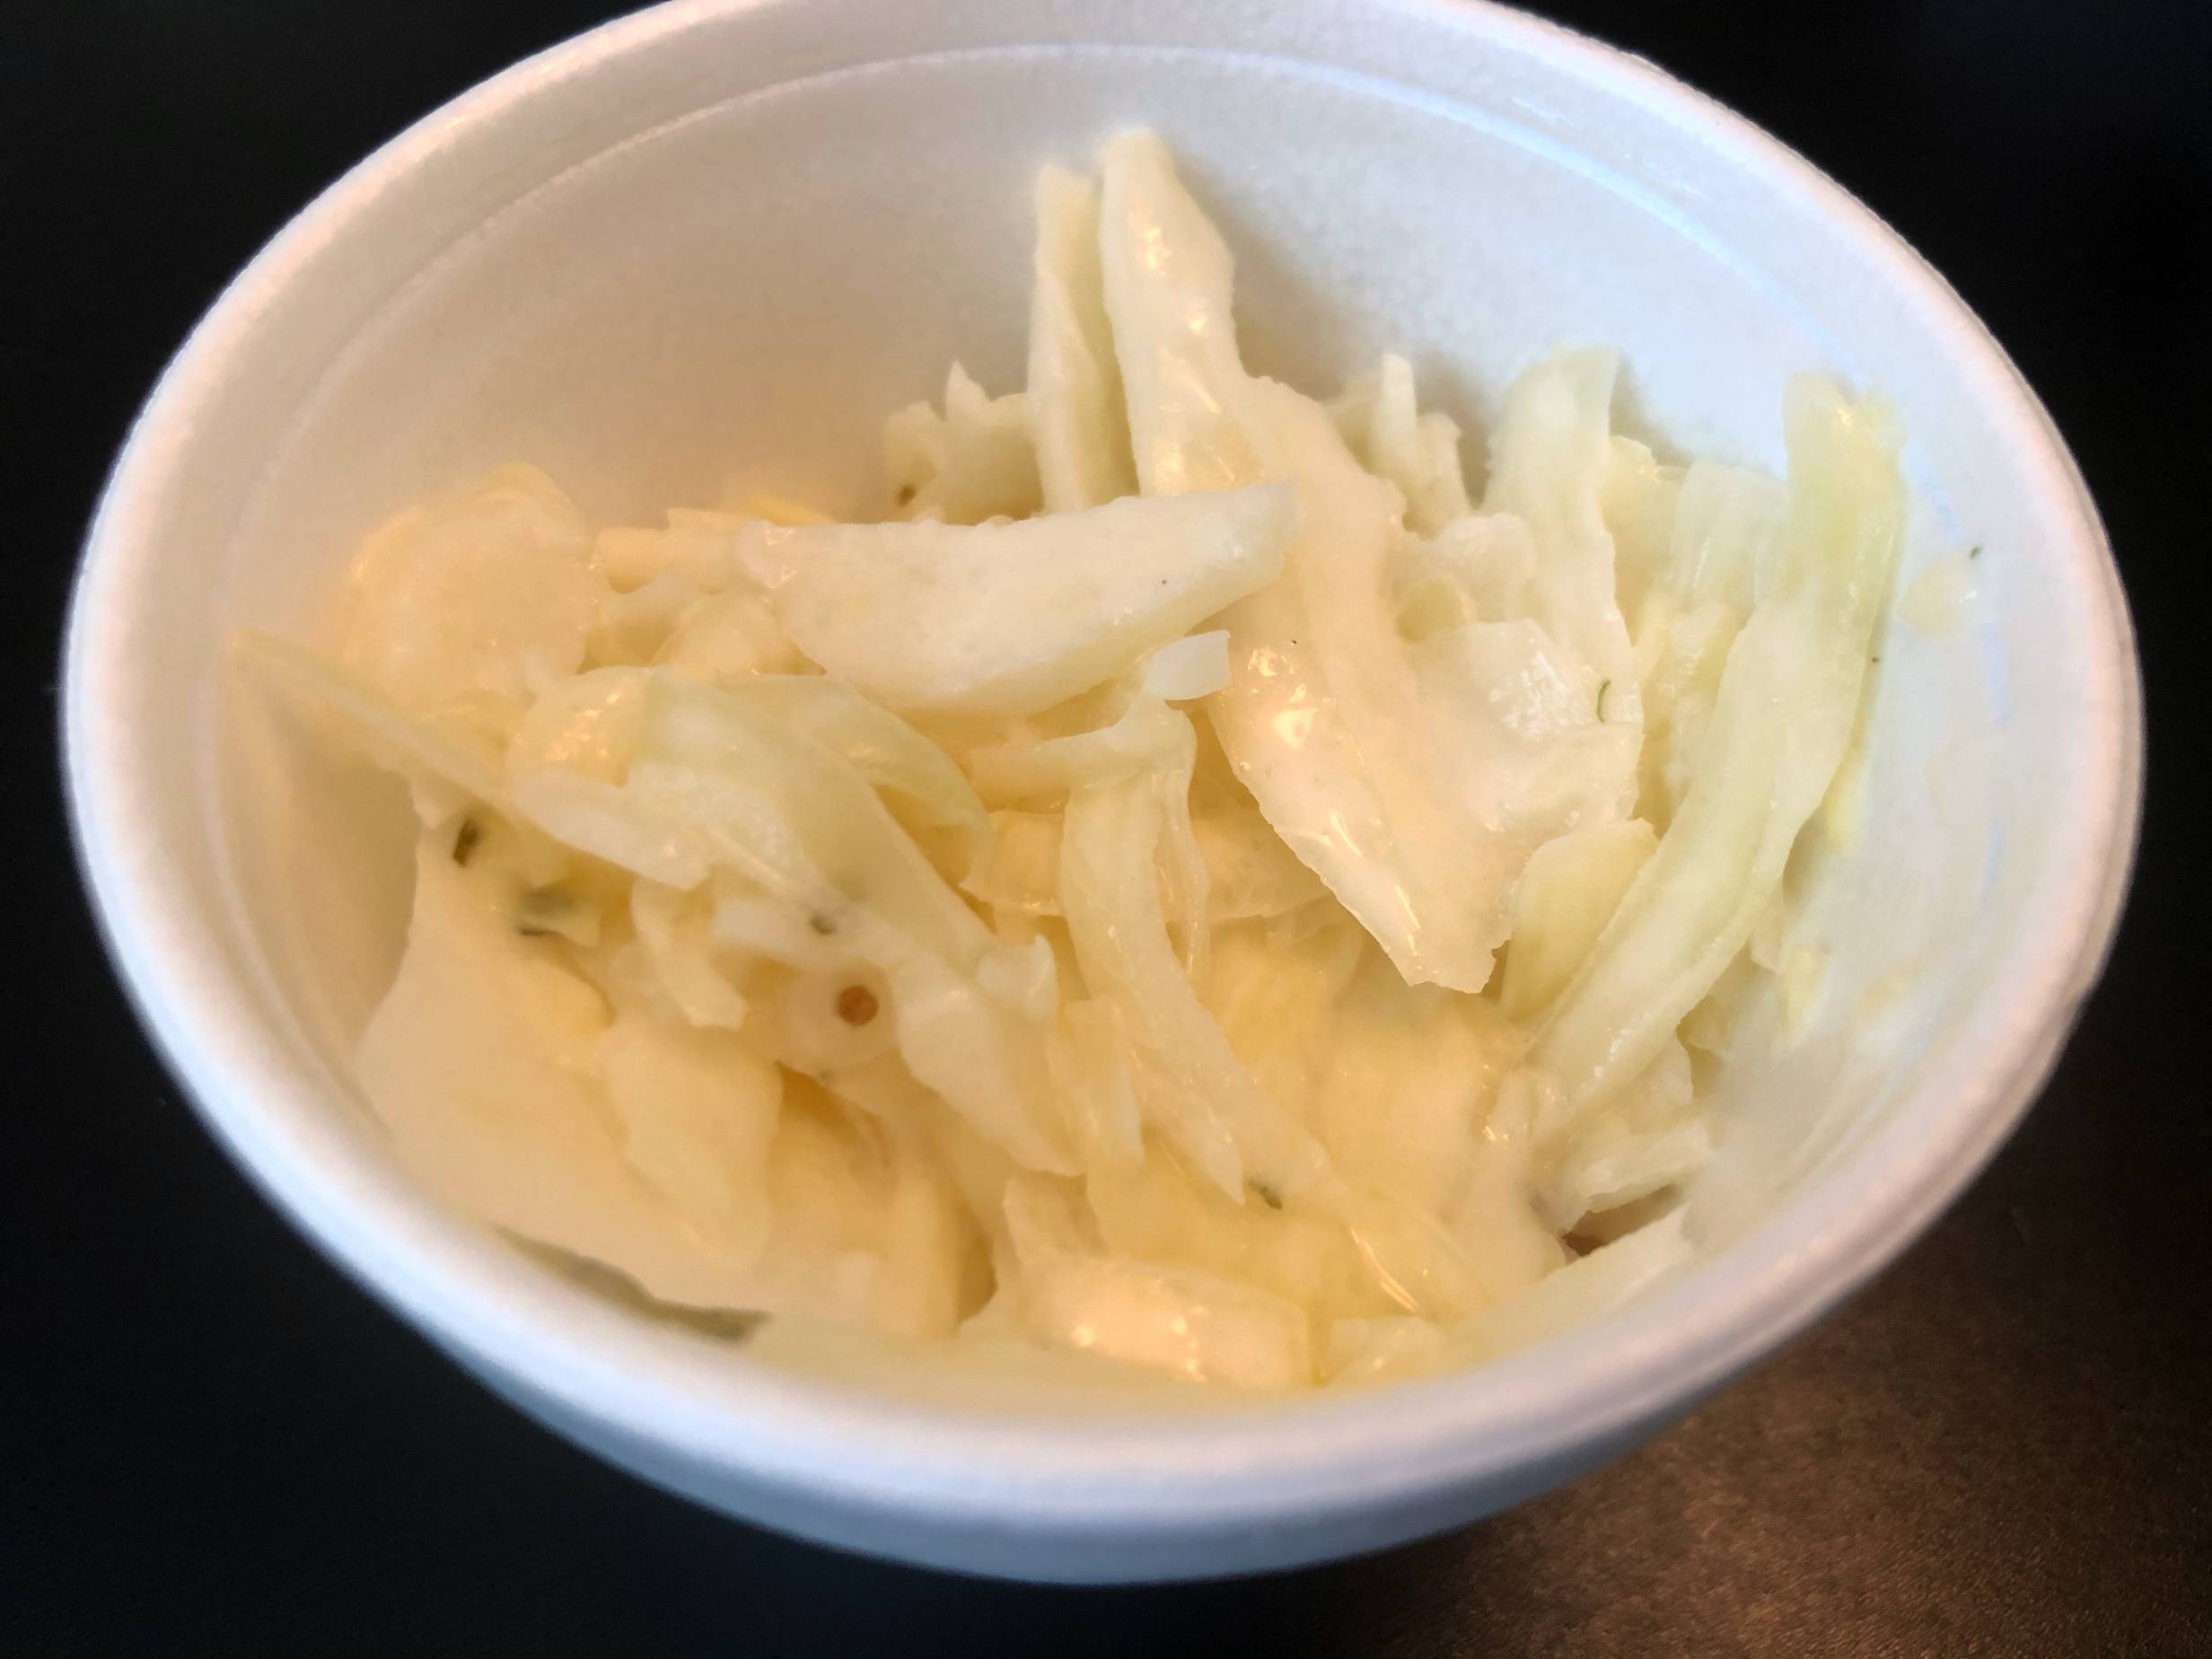 A small portion of white cabbage coleslaw is in a white styrofoam container. Photo by Alyssa Buckley.